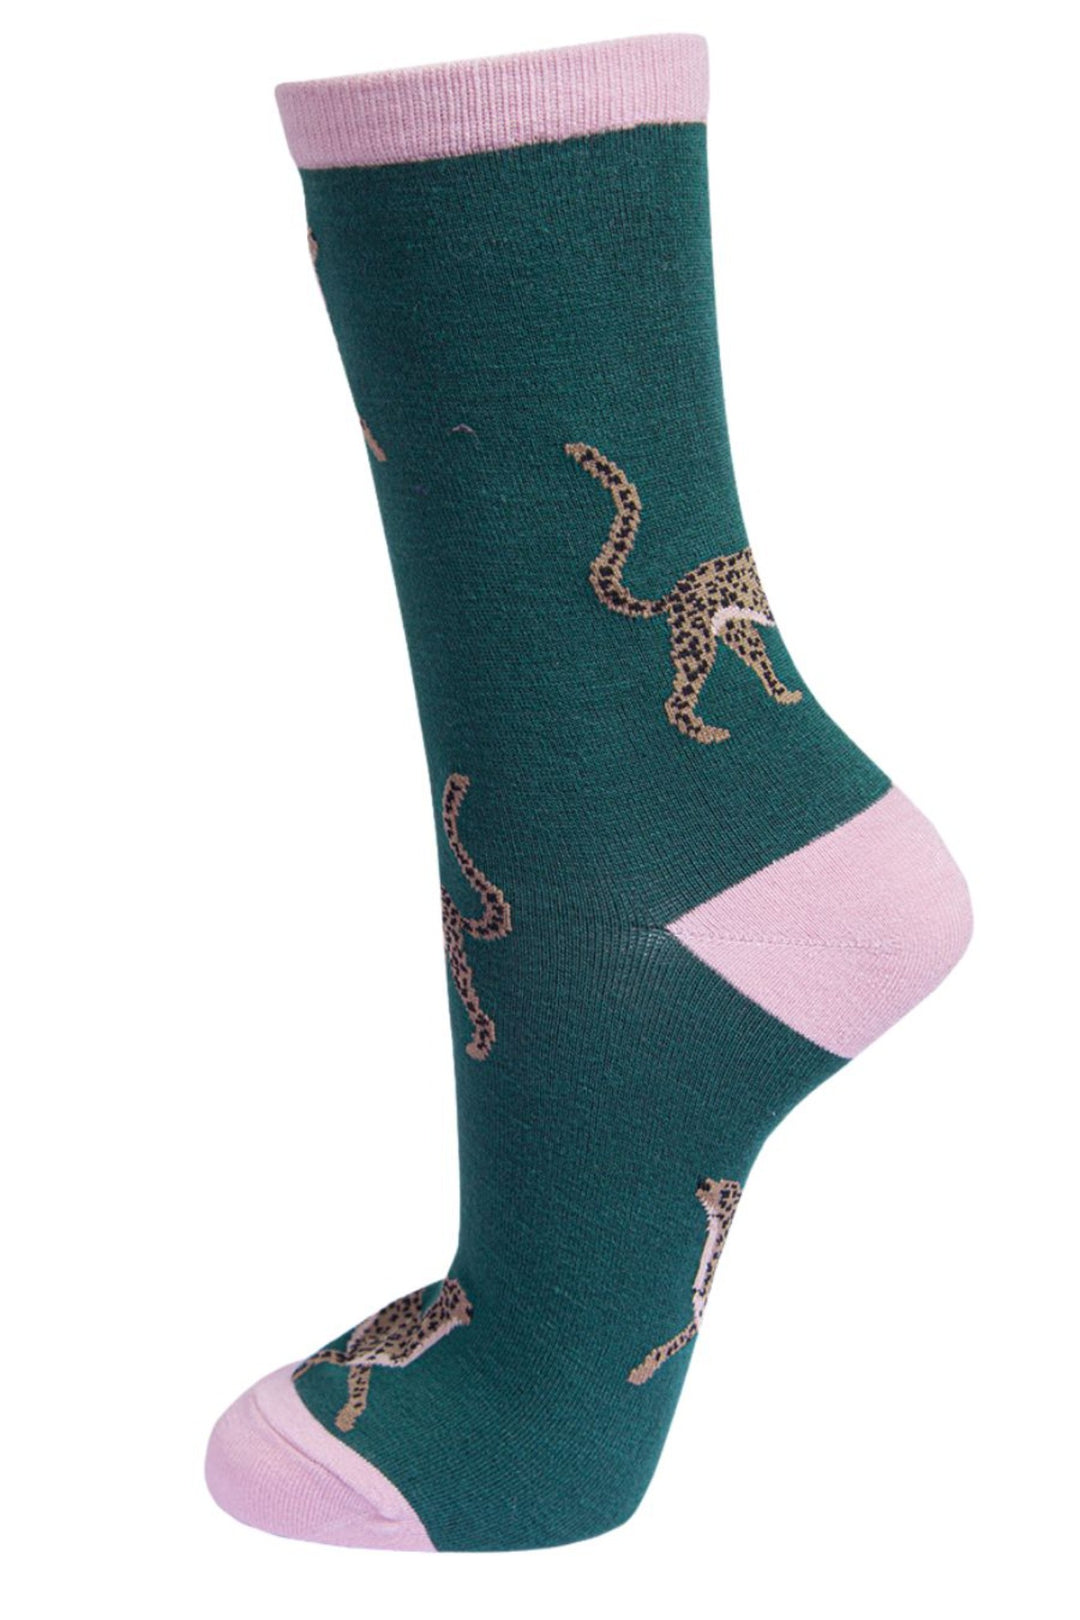 green socks with a pattern of cheetah cats